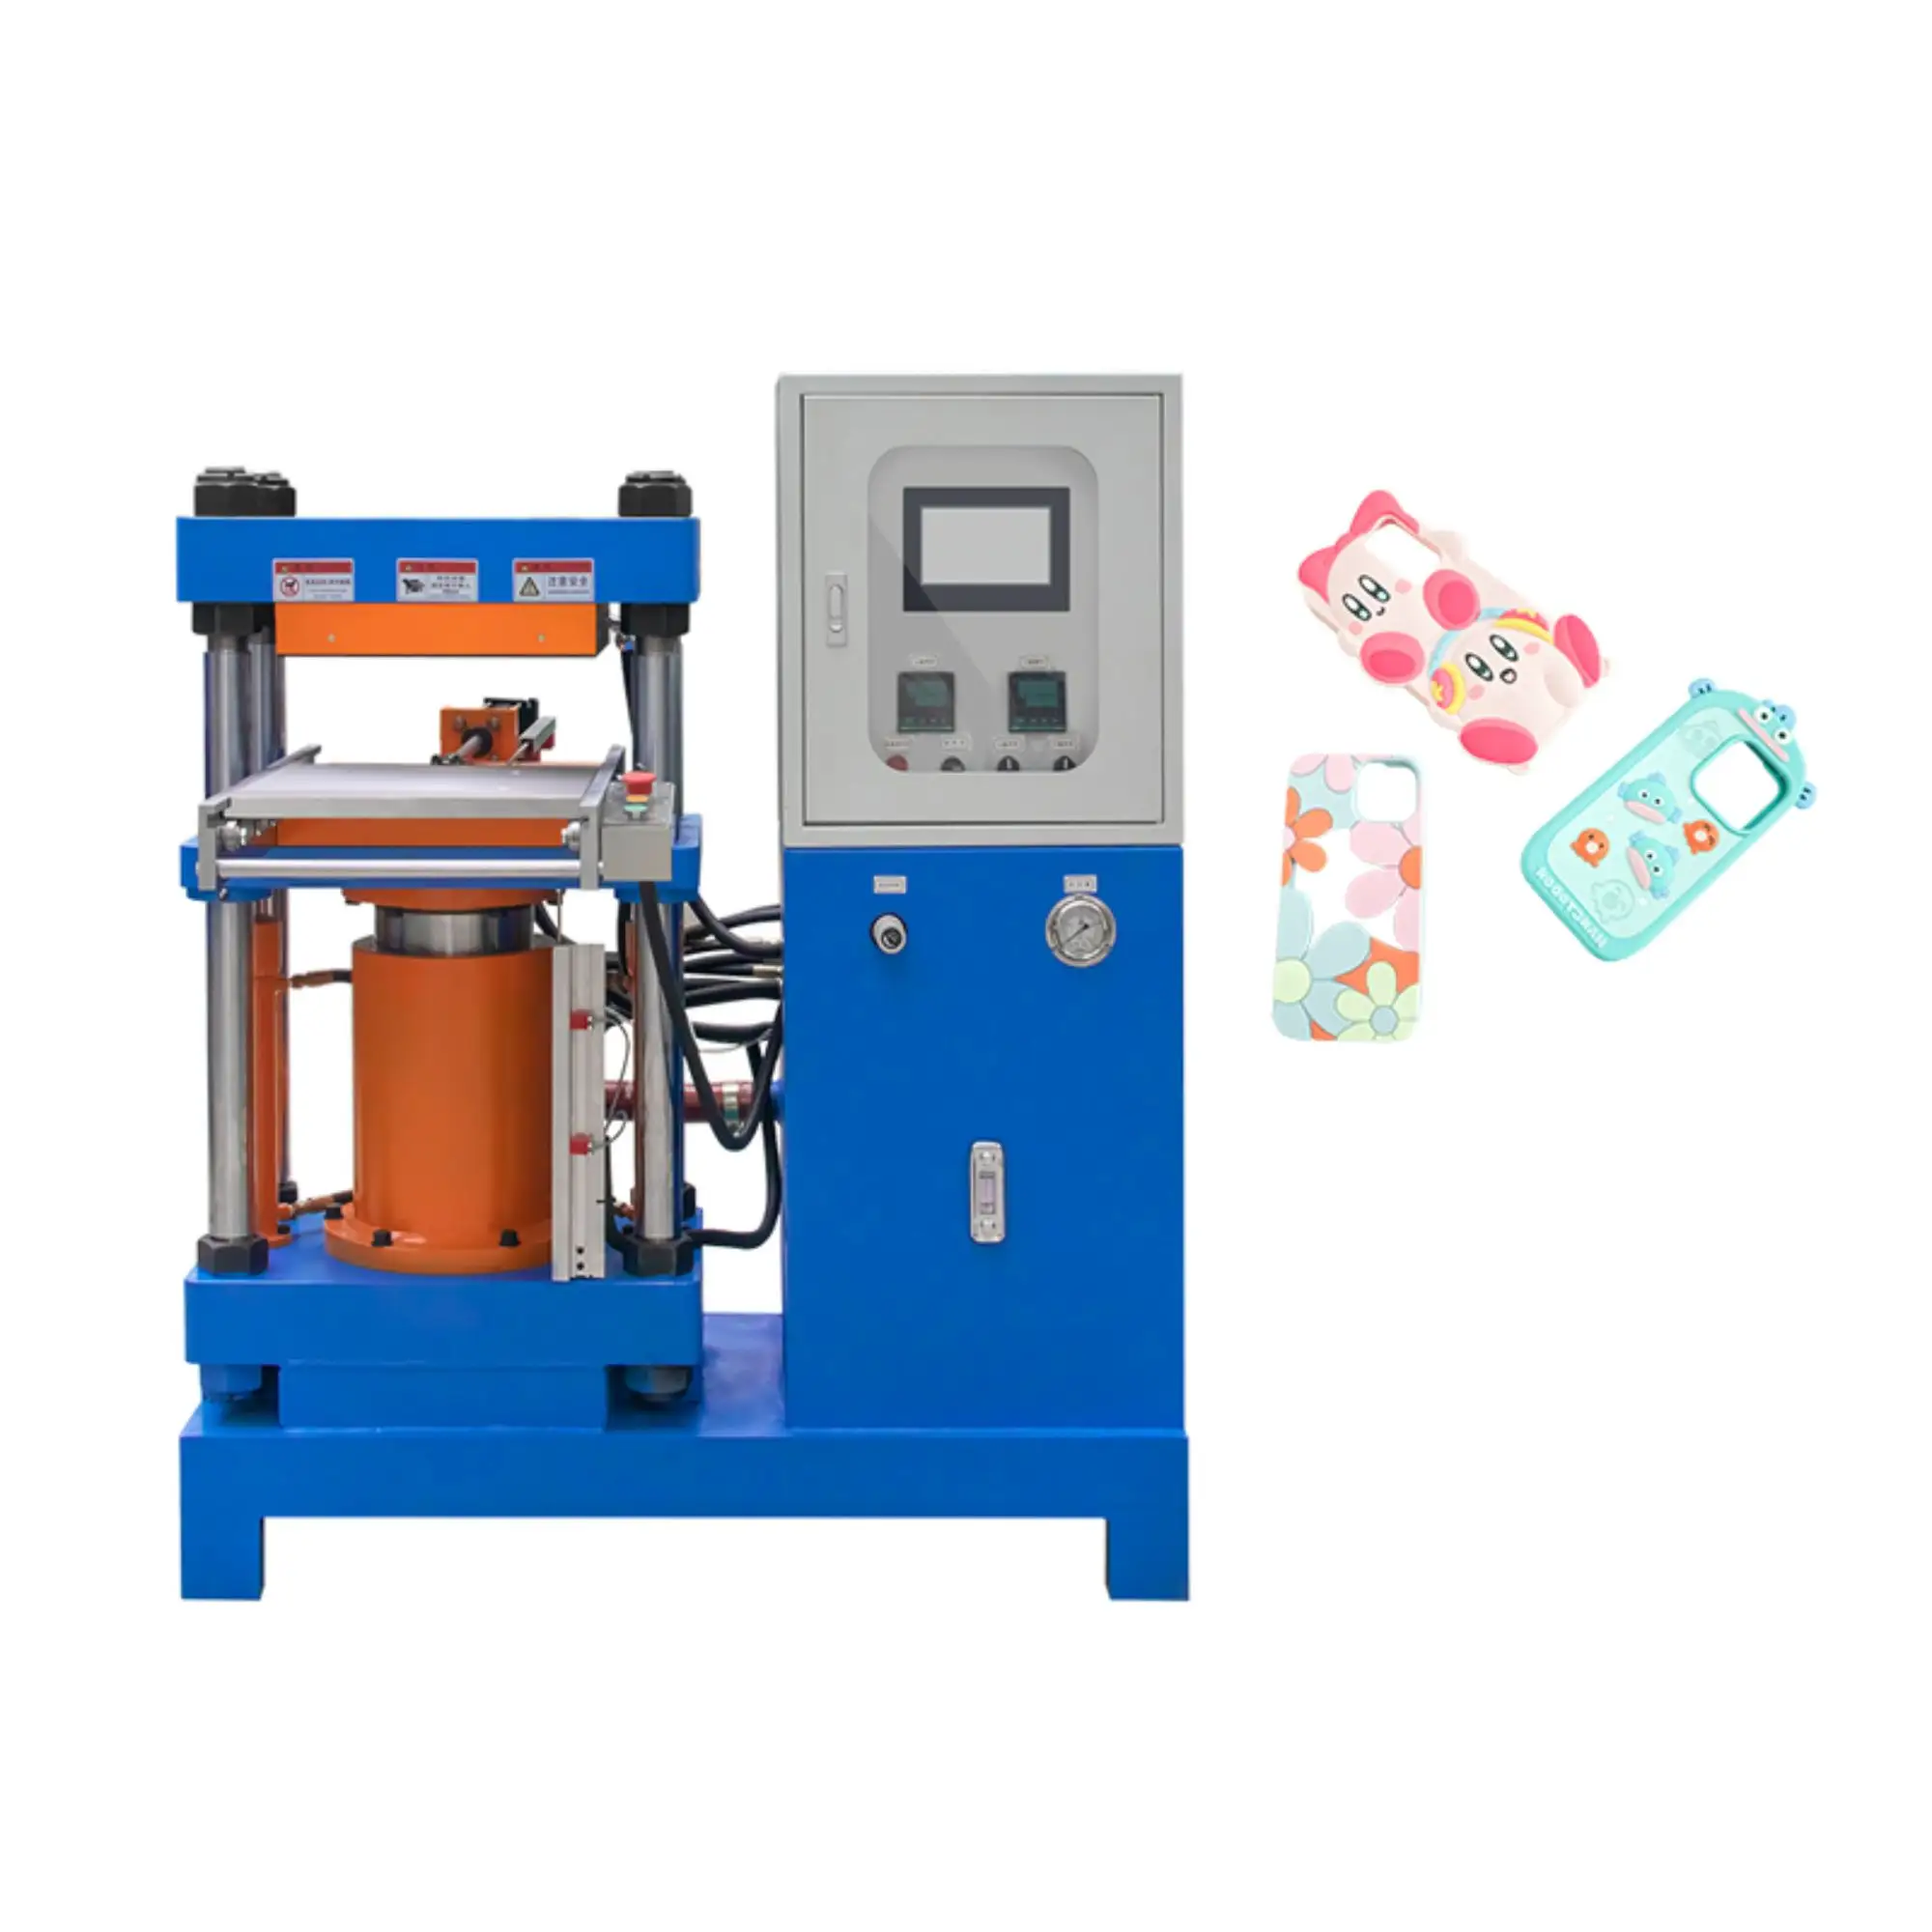 What is the cost of PVC tag making machine?